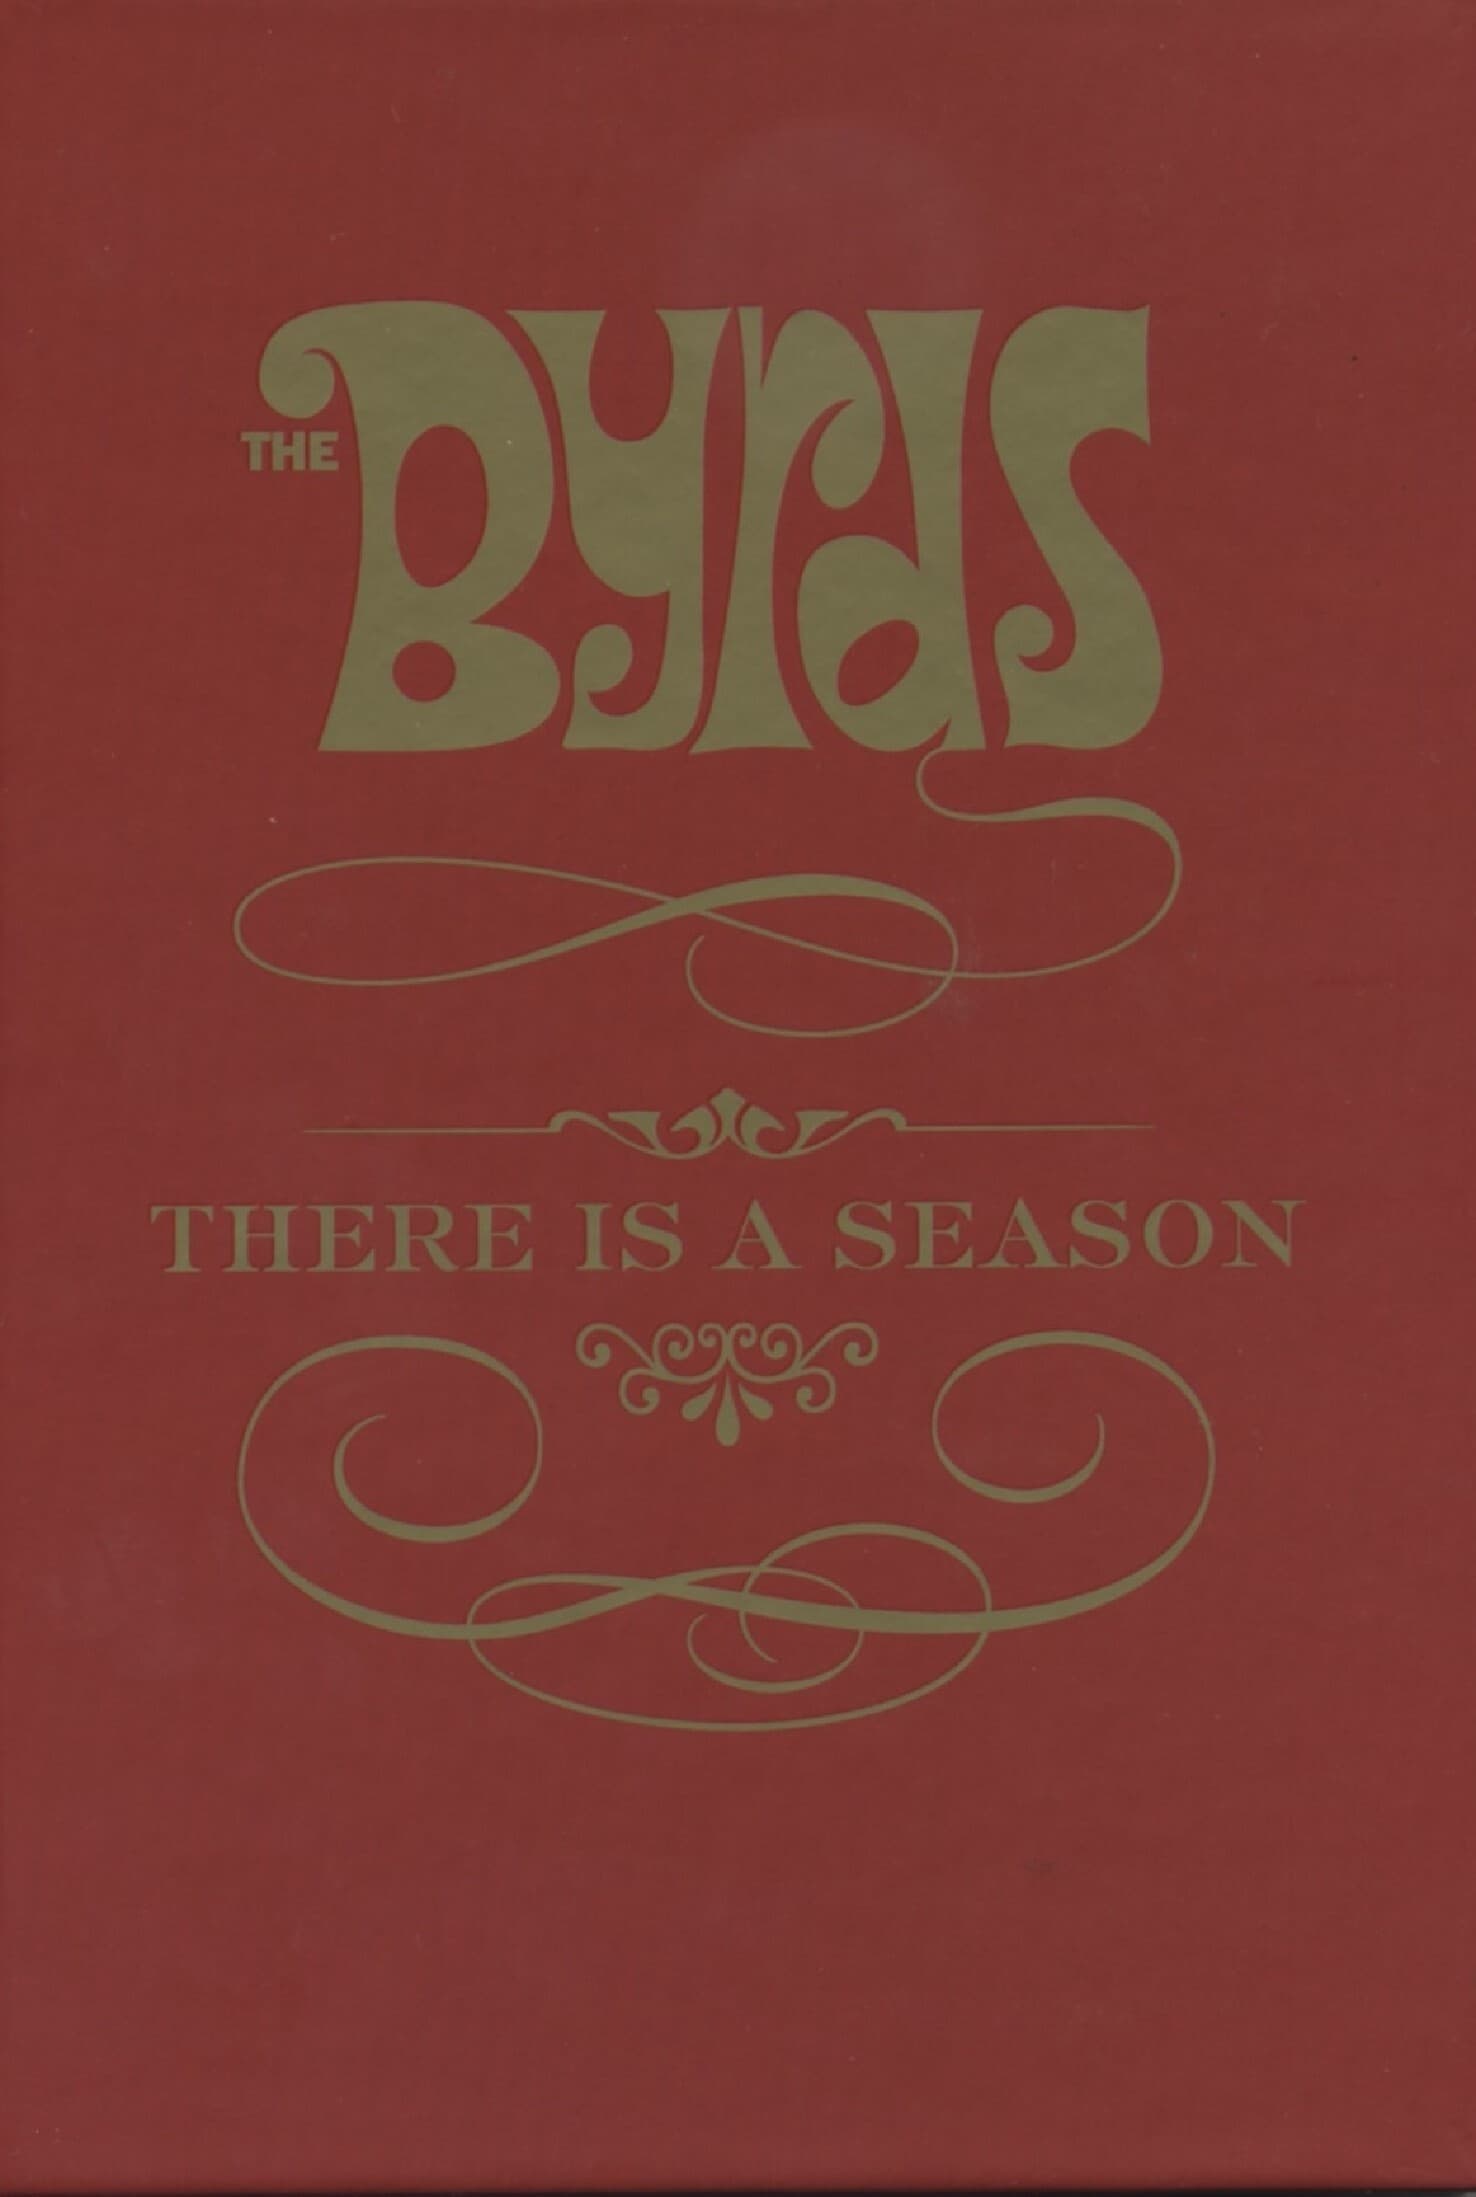 The Byrds: There is a Season